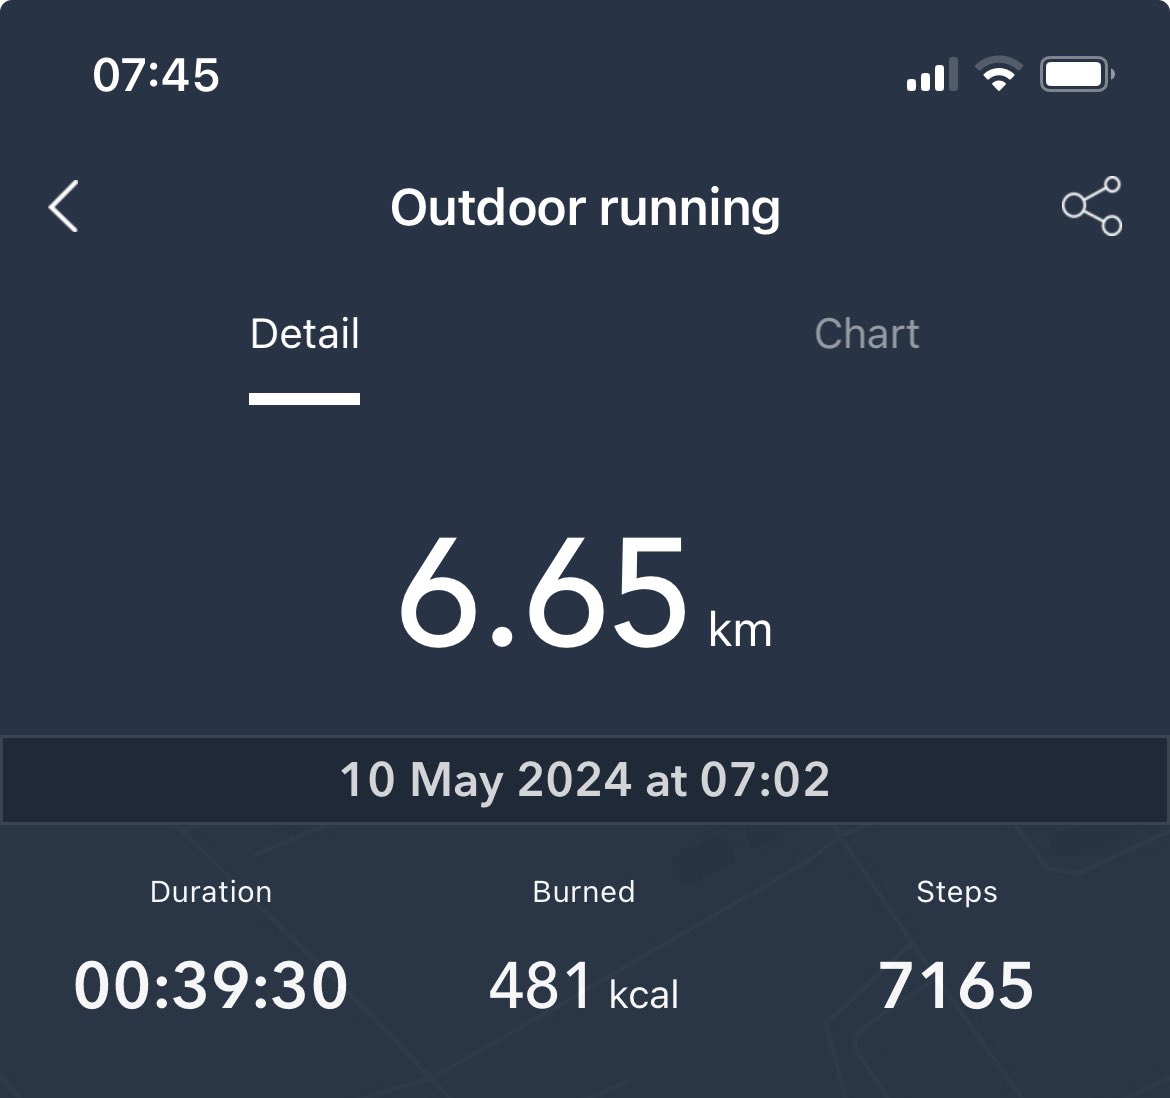 Continued recovery and morning Vitamin D fix with another training run done for my fundraiser for @53two - accompanied by the excellent @MyTCpod with @fentonstevens in conversation with Paul Hendy. A great listen and great way to start the day x